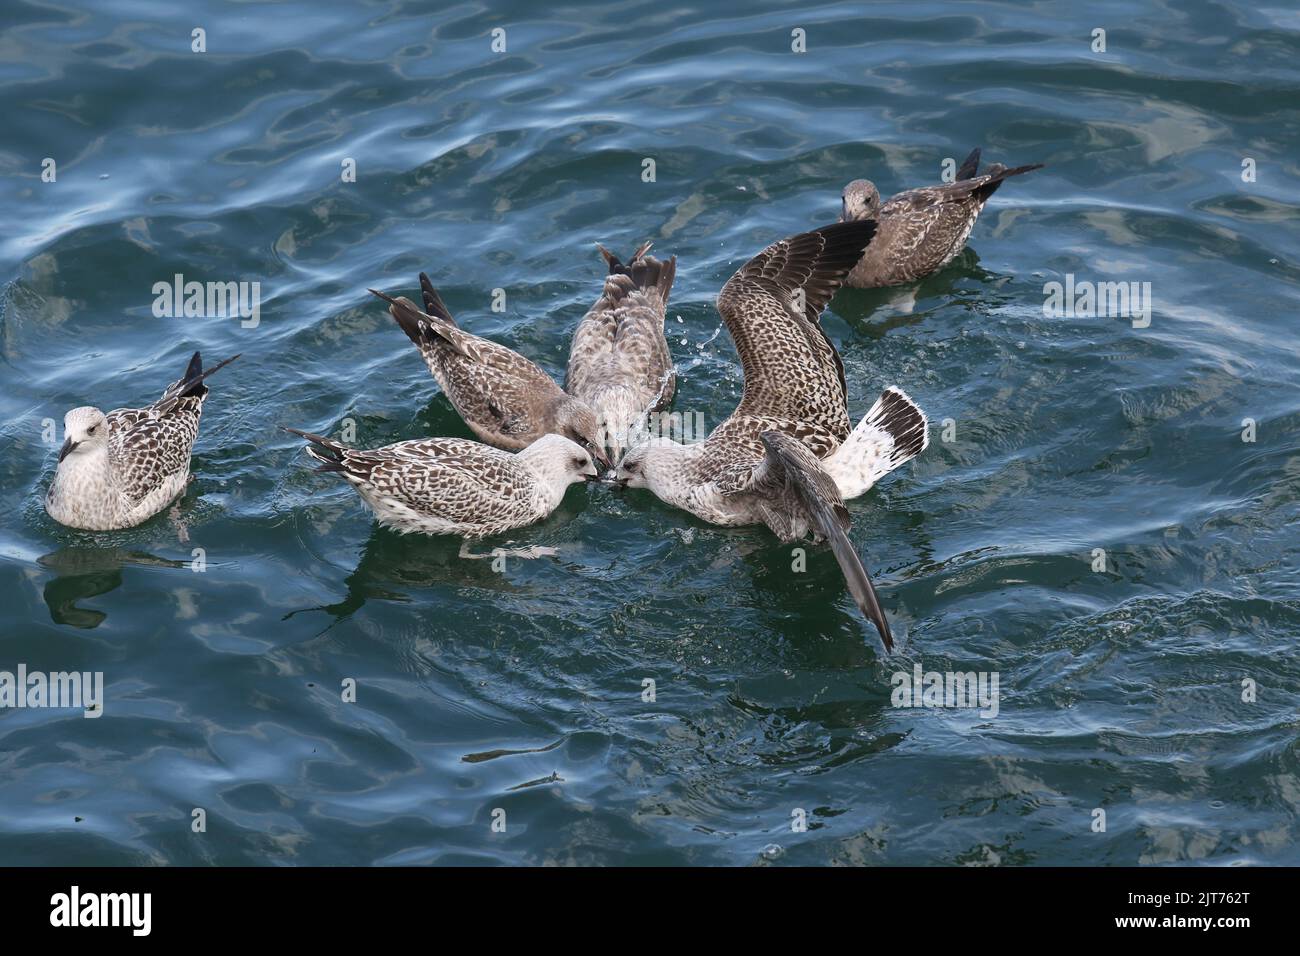 A group of hungry seagulls fighting over fish scraps at the Chatham Fishing Pier viewed from the observation deck Stock Photo